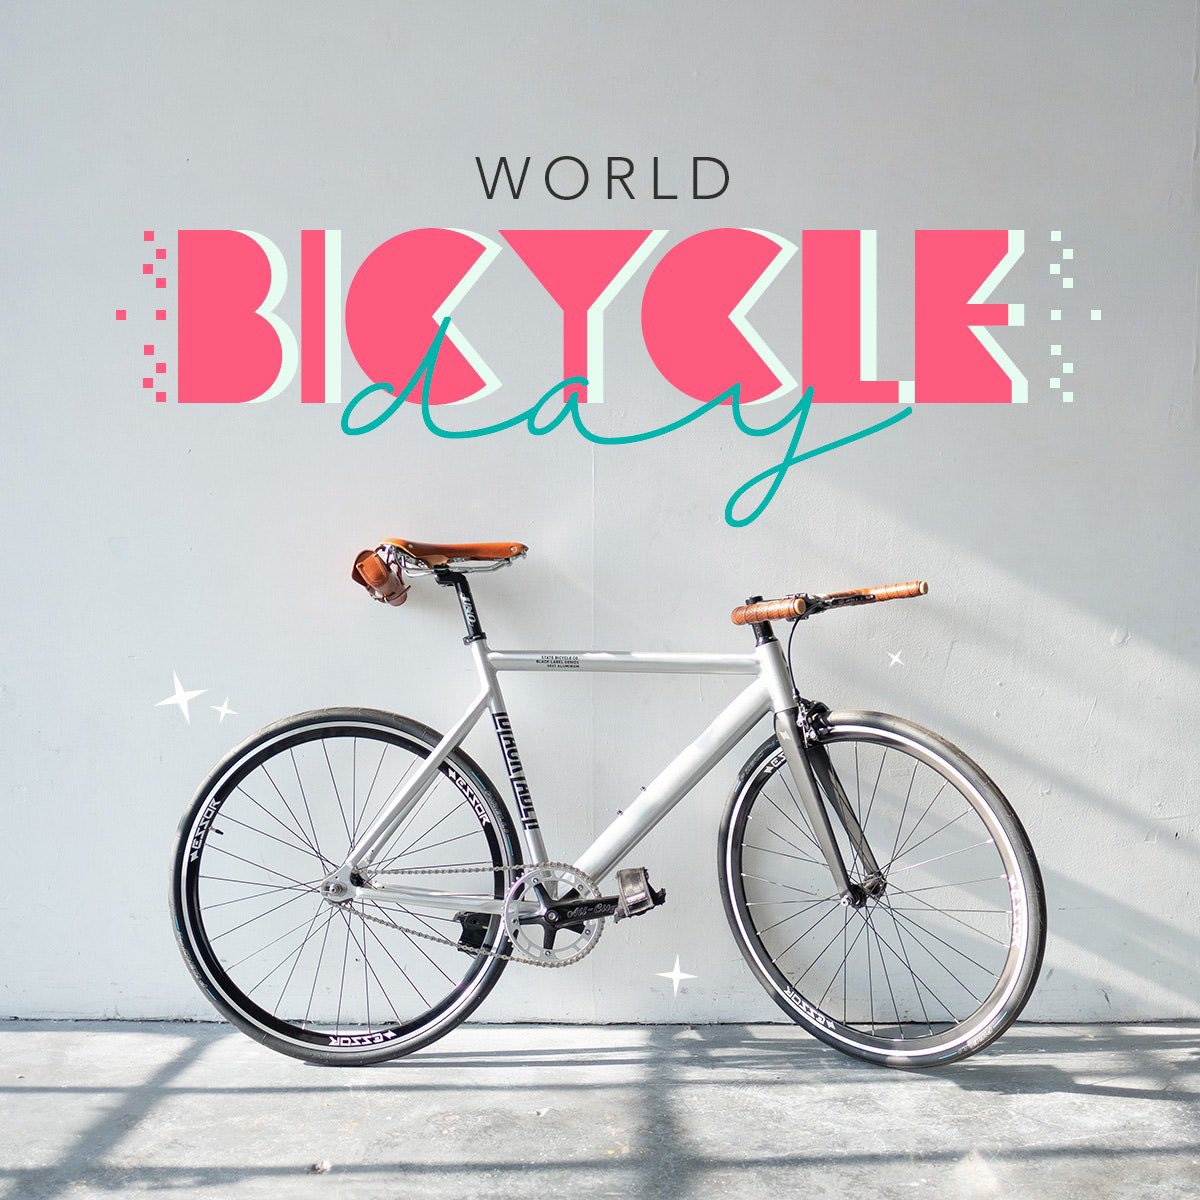 Bicycling is not only a reliable and sustainable mode of transportation but also boosts your mood and is a fun, low-impact form of exercise for everyone. 
#worldbicyclingday #bicycling #worldbikeday